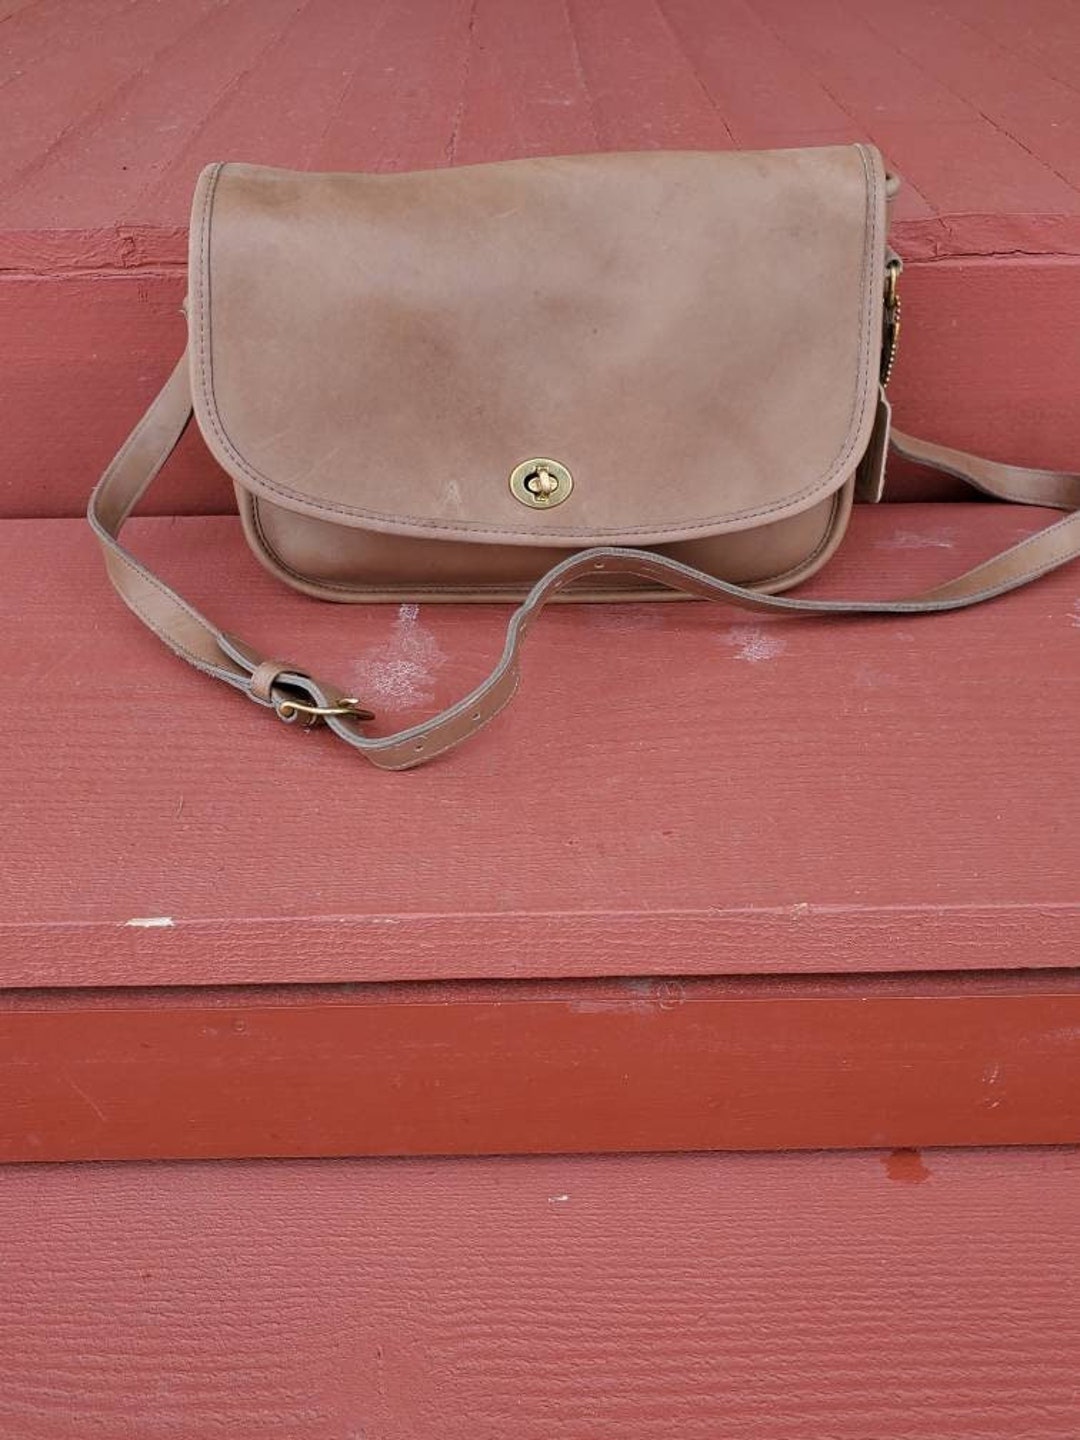 Coach Tan Leather Cross Body Bag Flap Top Creed 012 7939 Etsy